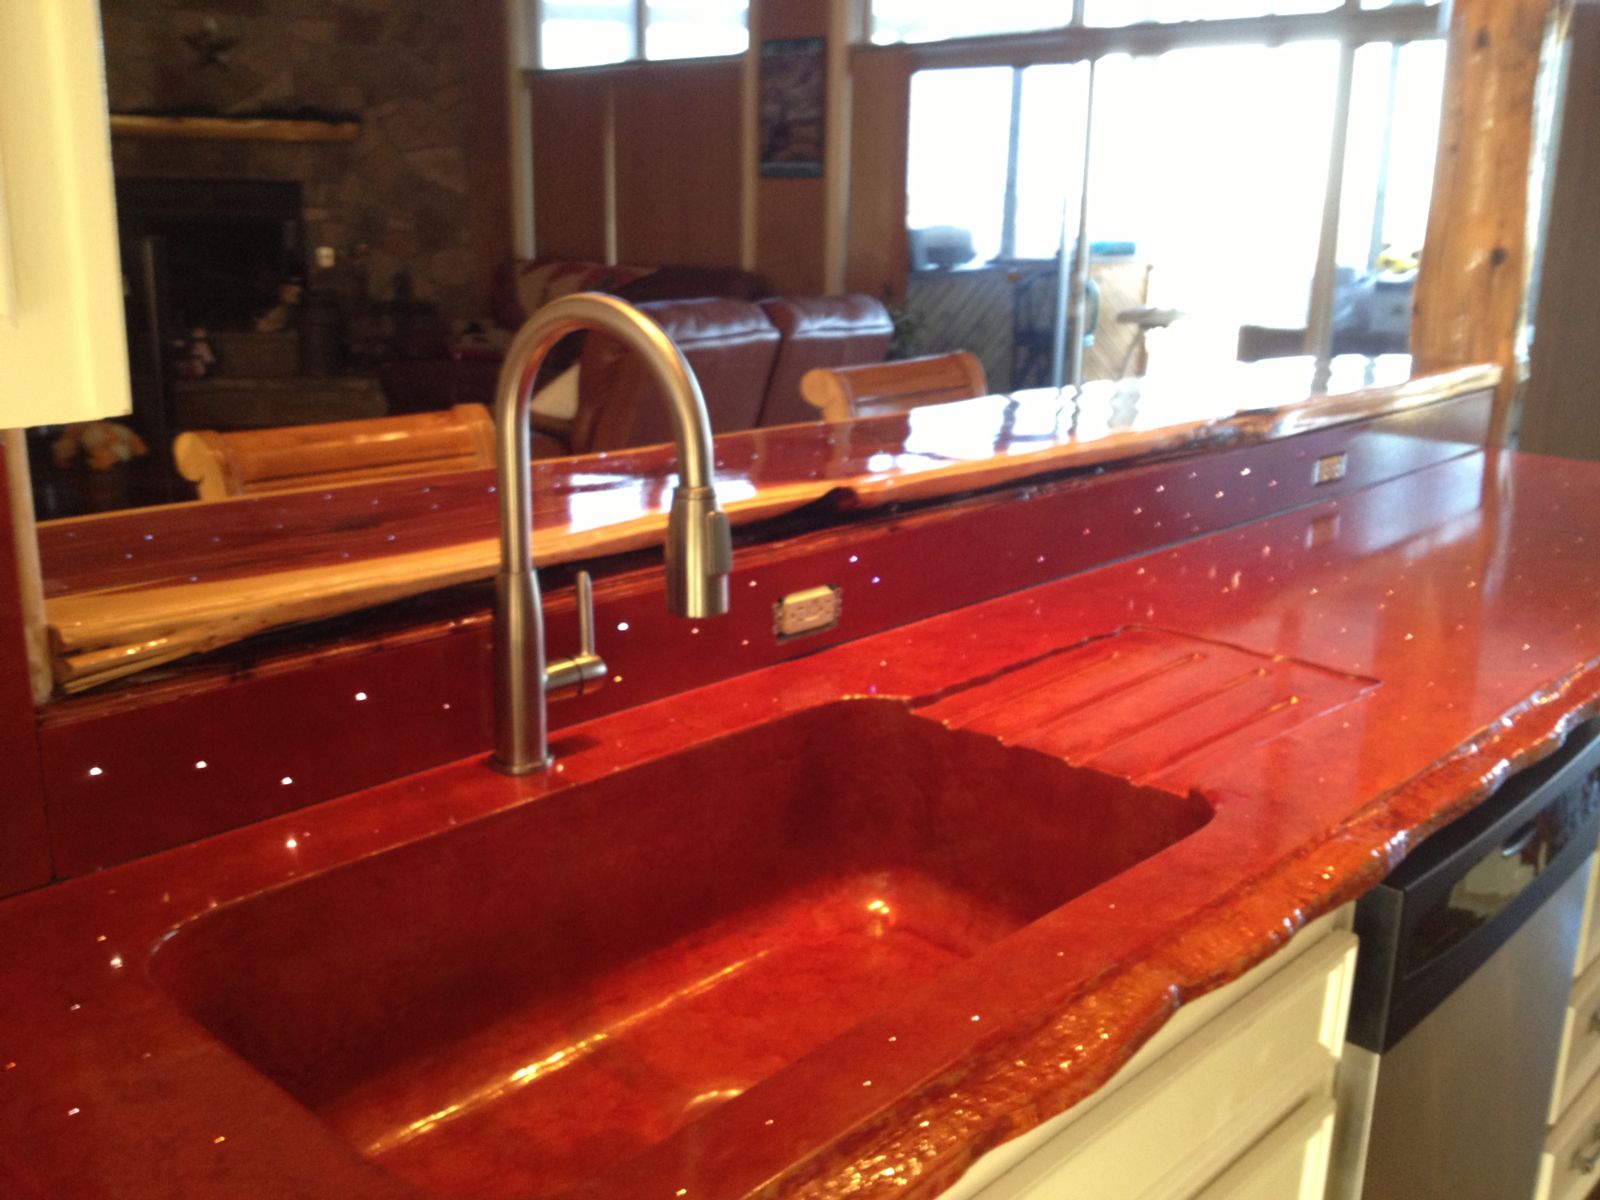 Red kitchen countertops cast in place with LED lights